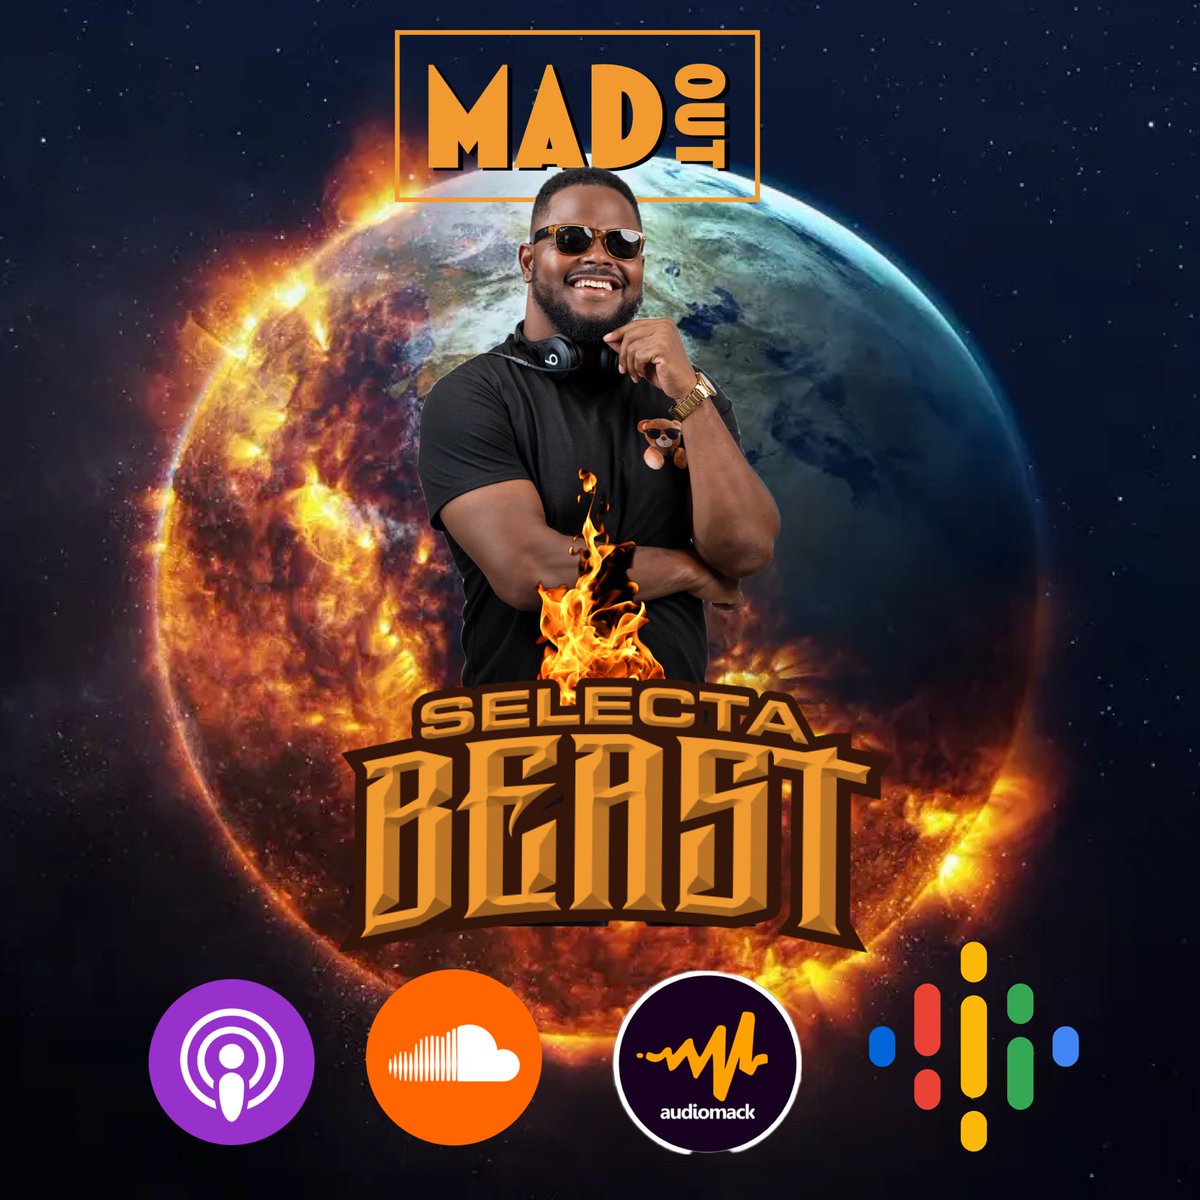 Now Available All your Major streaming platforms, Google podcasts, Apple podcasts, sound cloud , AudioMark. The mixtape all your favorite JAMS MAD-OUT THE PARTY MIX BY DJ SELECTA BEAST Now Available ALL your streaming platforms Dancehall Hip Hop R&B Soca Afrobeat